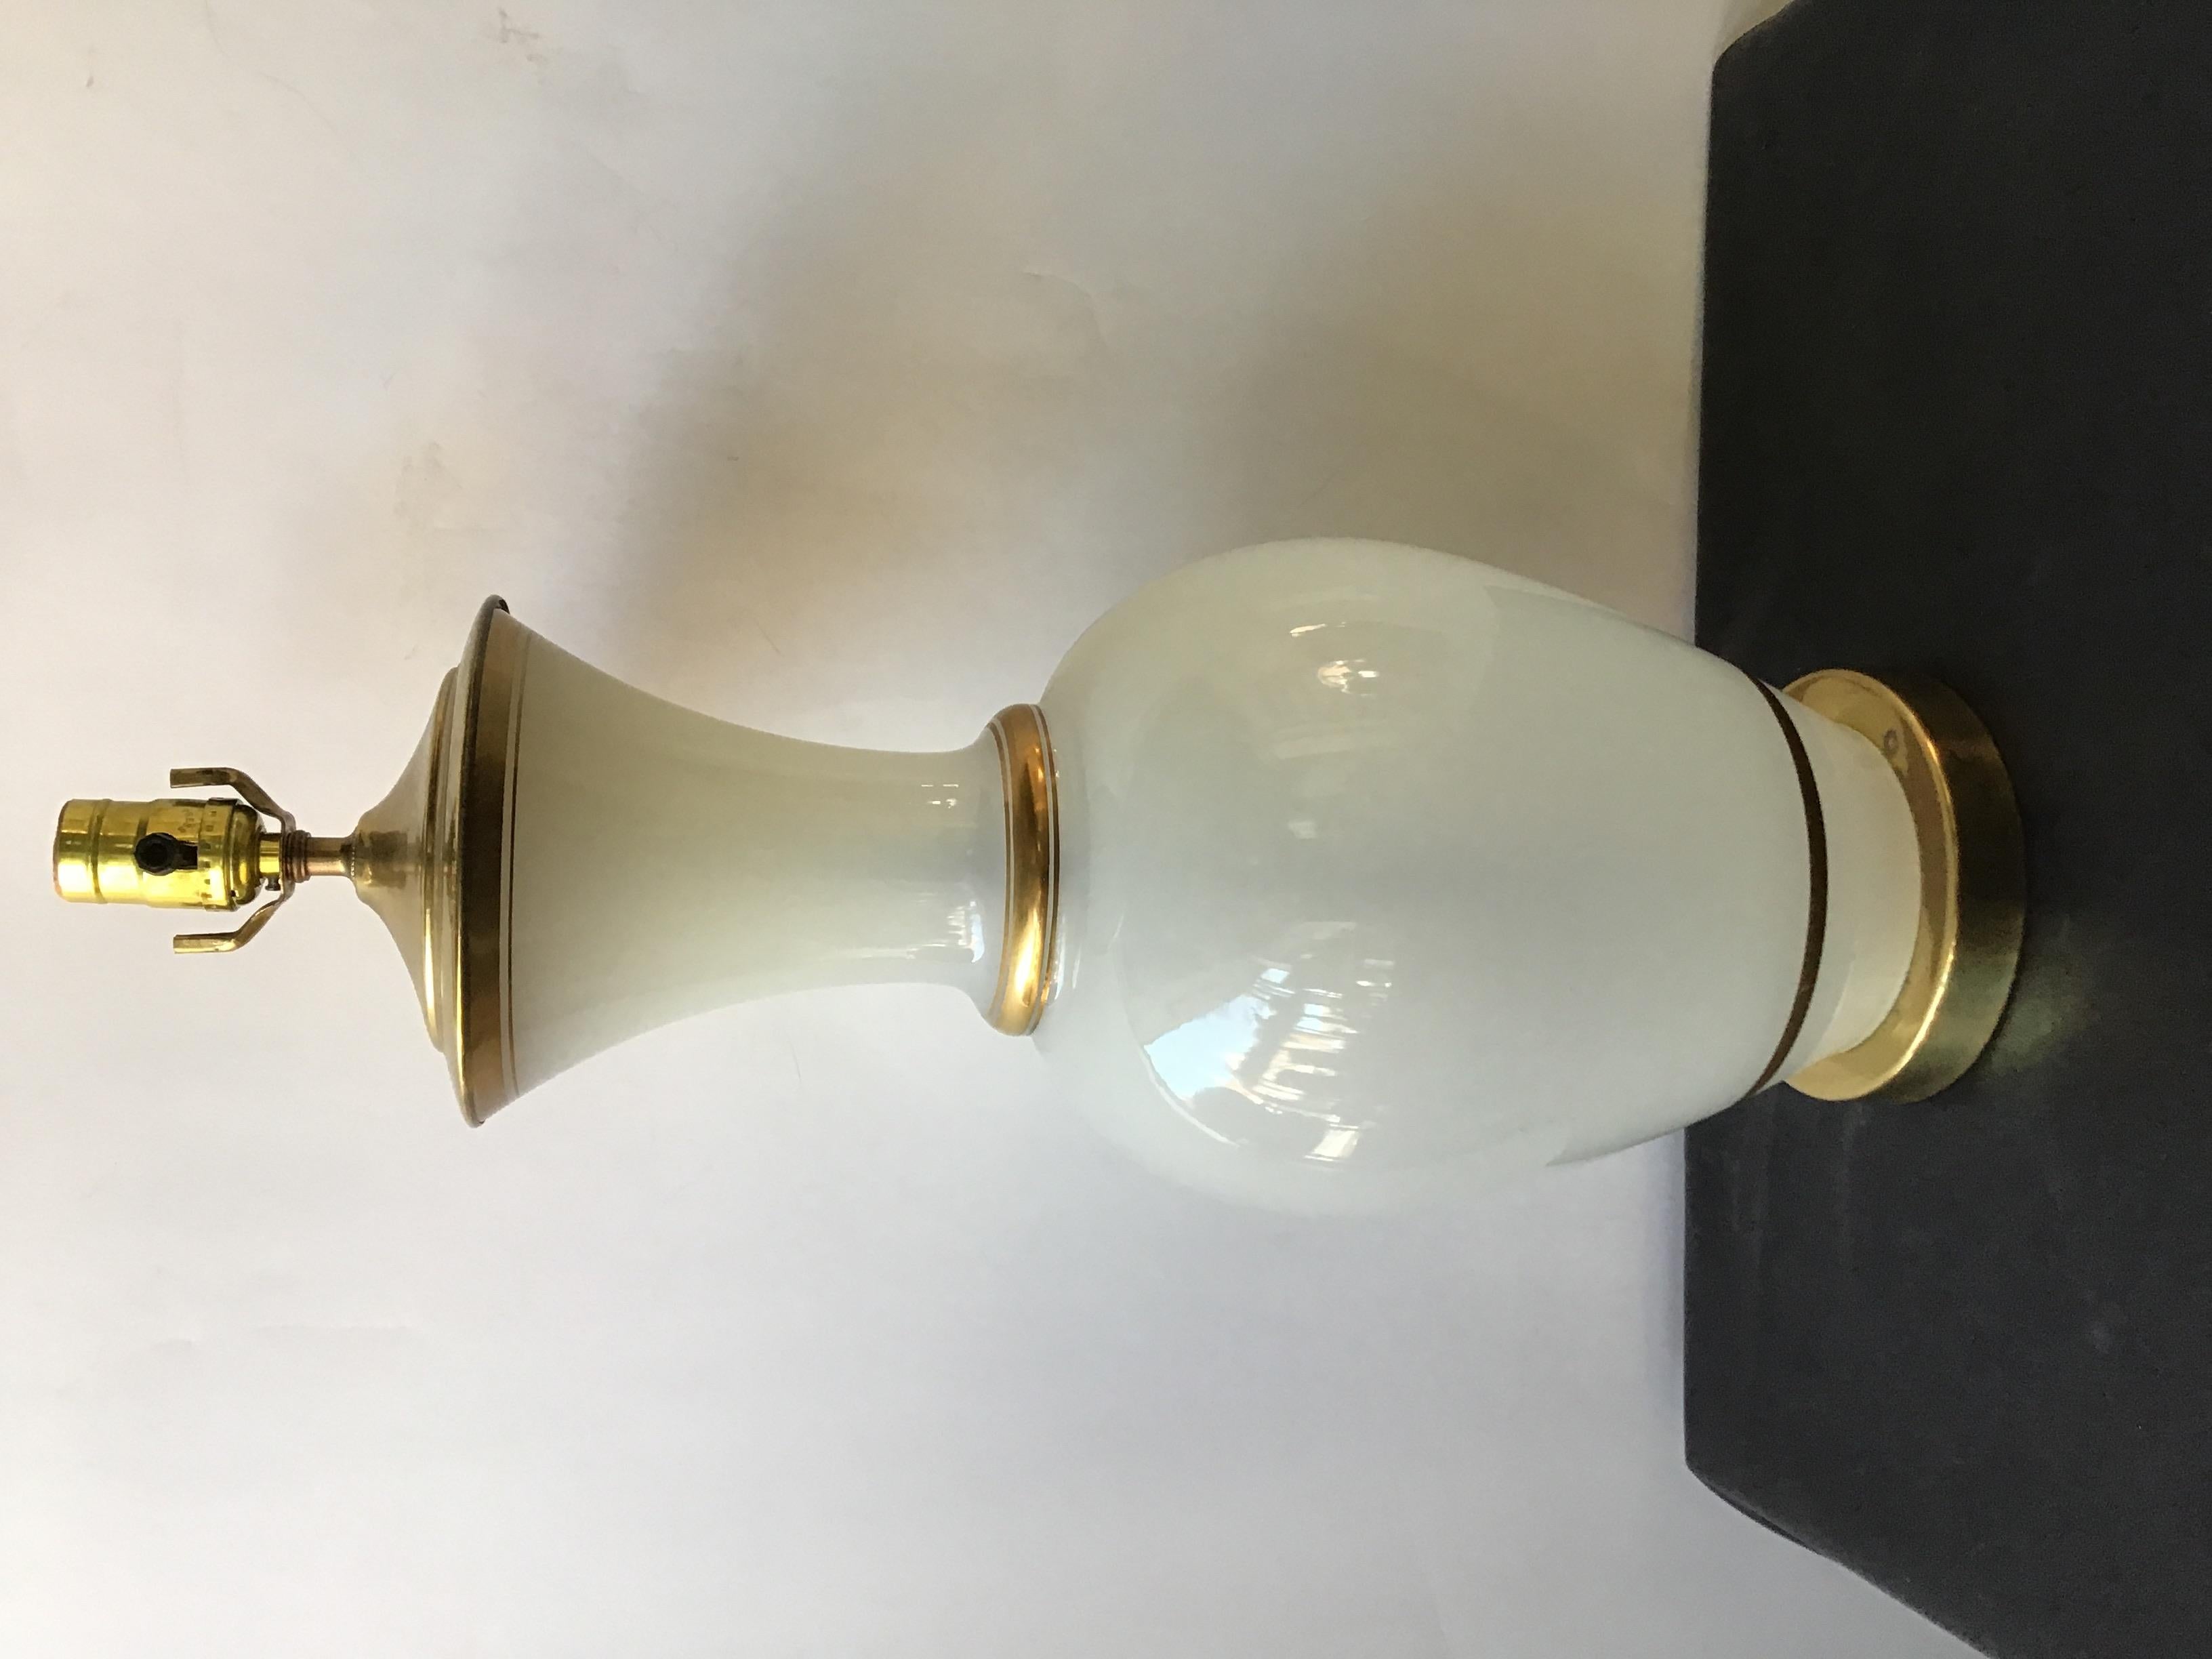 Pair of large 1950s opaline glass lamps with gold trim and solid brass fittings.